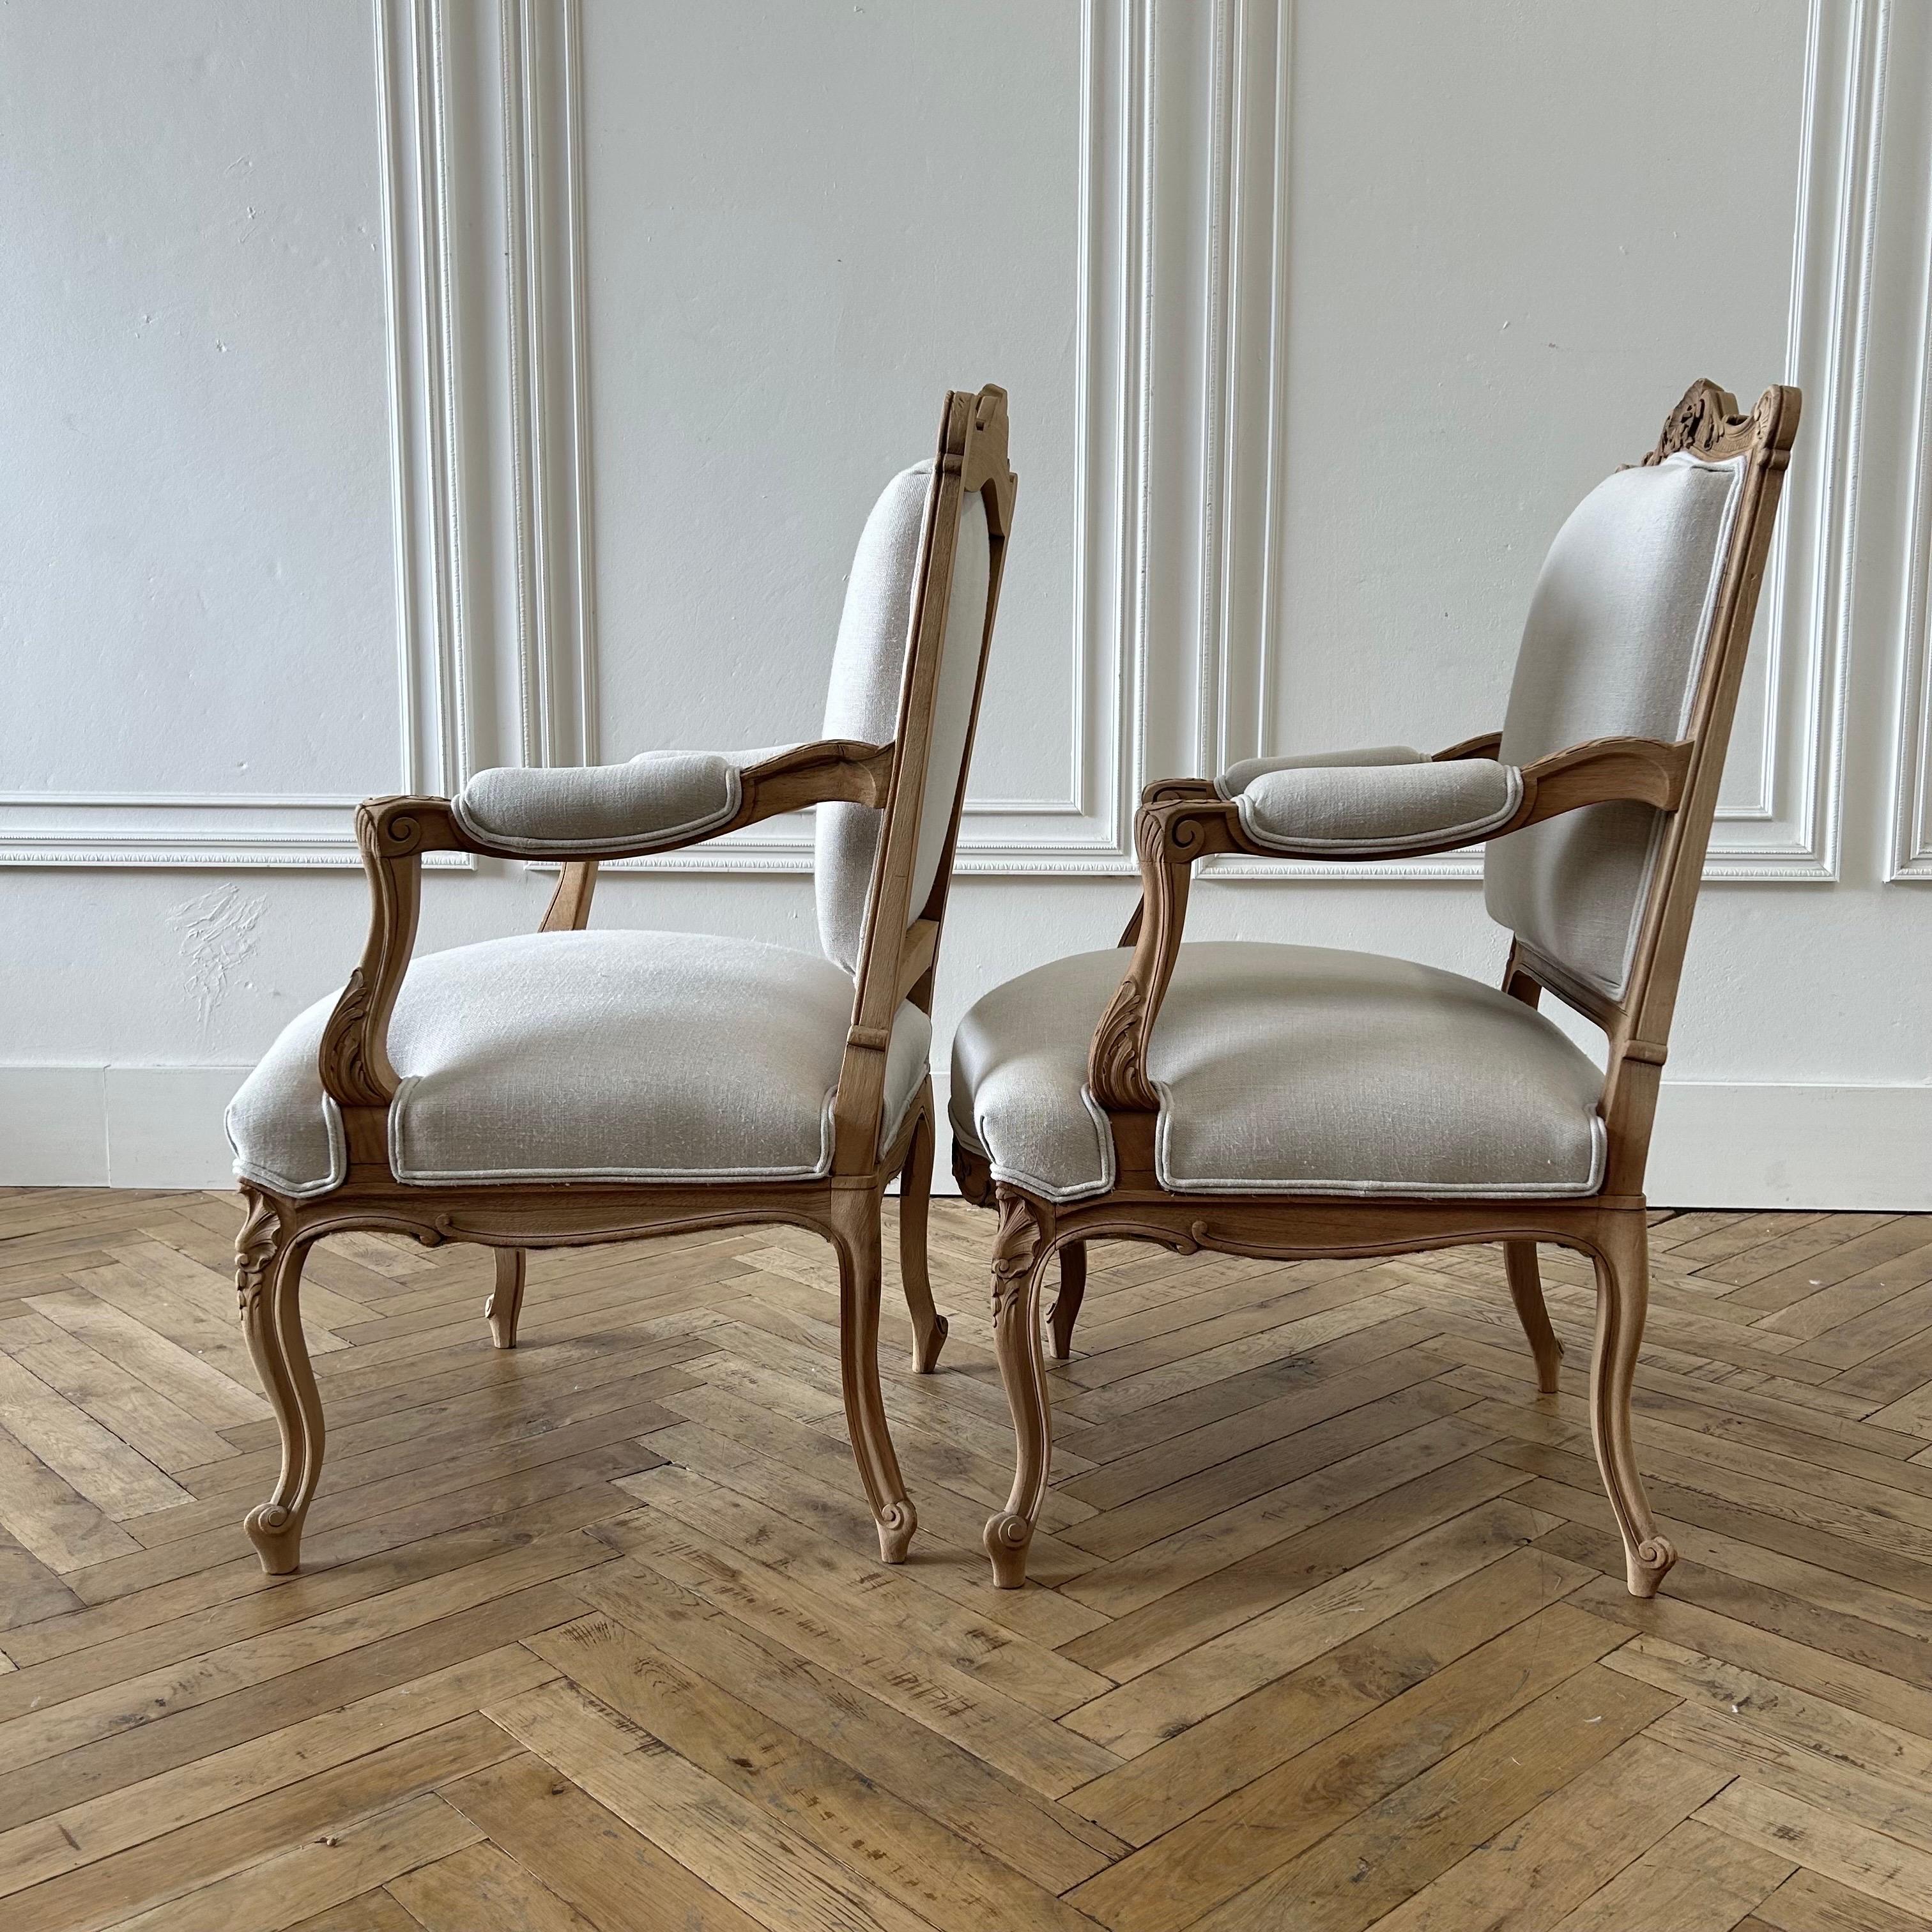 French Early 20th Century Bleached Walnut and Linen Upholstered Open Arm Chairs